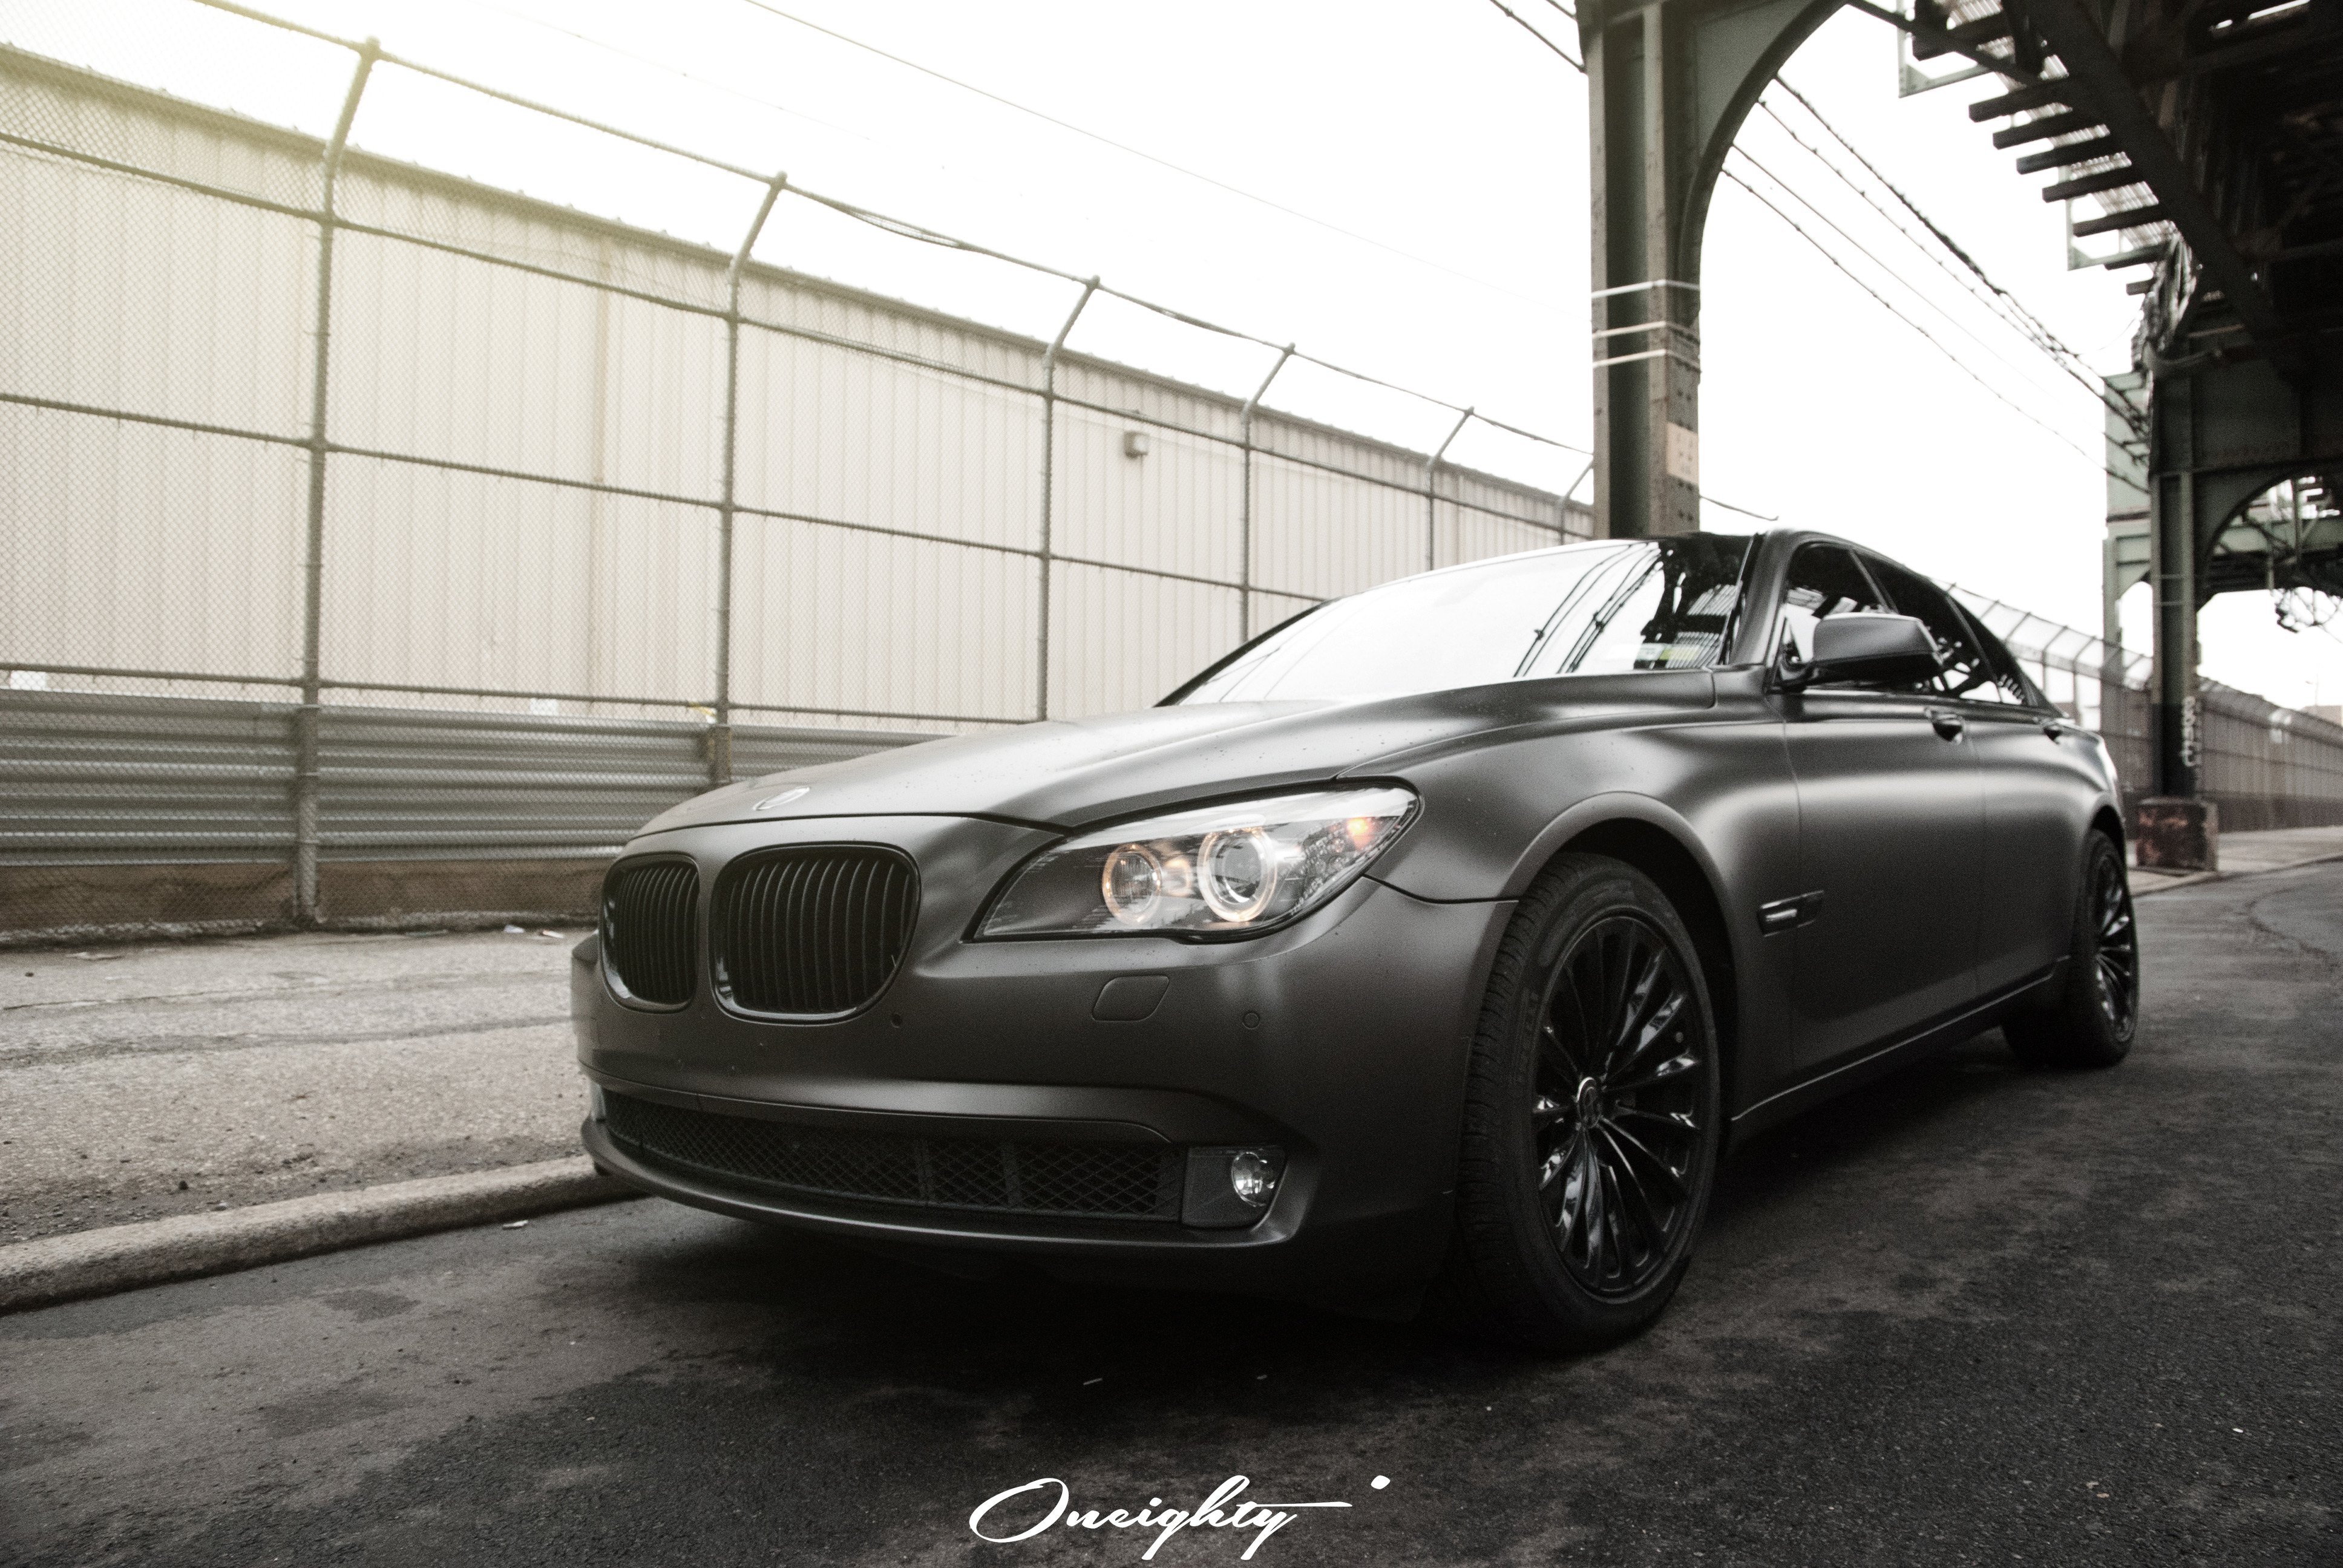 Front Bumper with Fog Lights on Gray BMW 7-Series  - Photo by ONEighty NYC